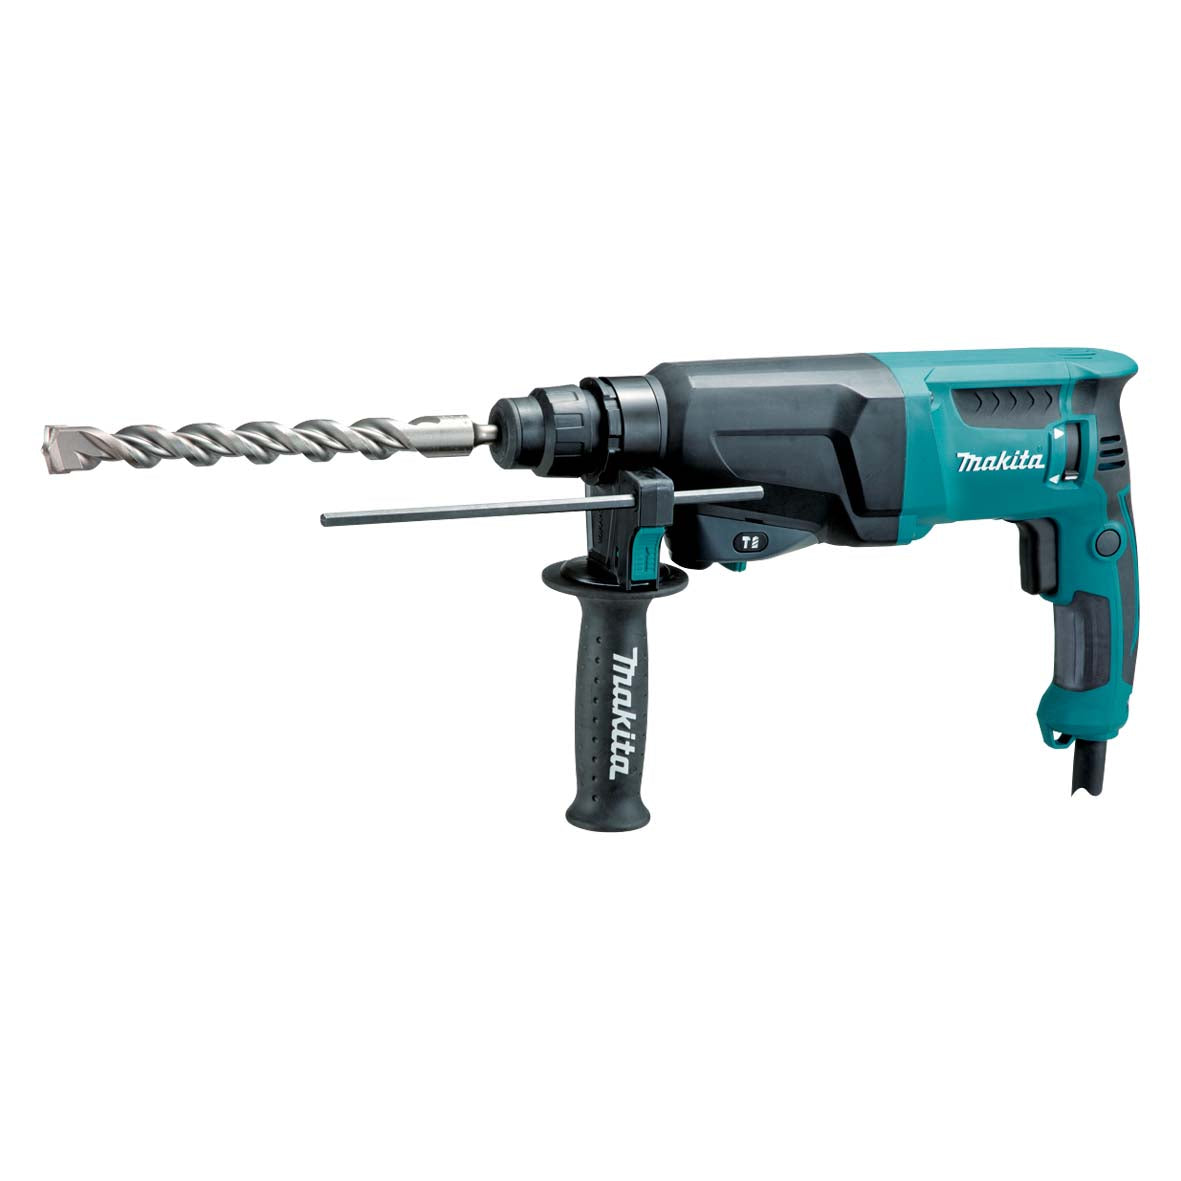 720W 23mm SDS-Plus Rotary Hammer Drill HR2300X6 by Makita